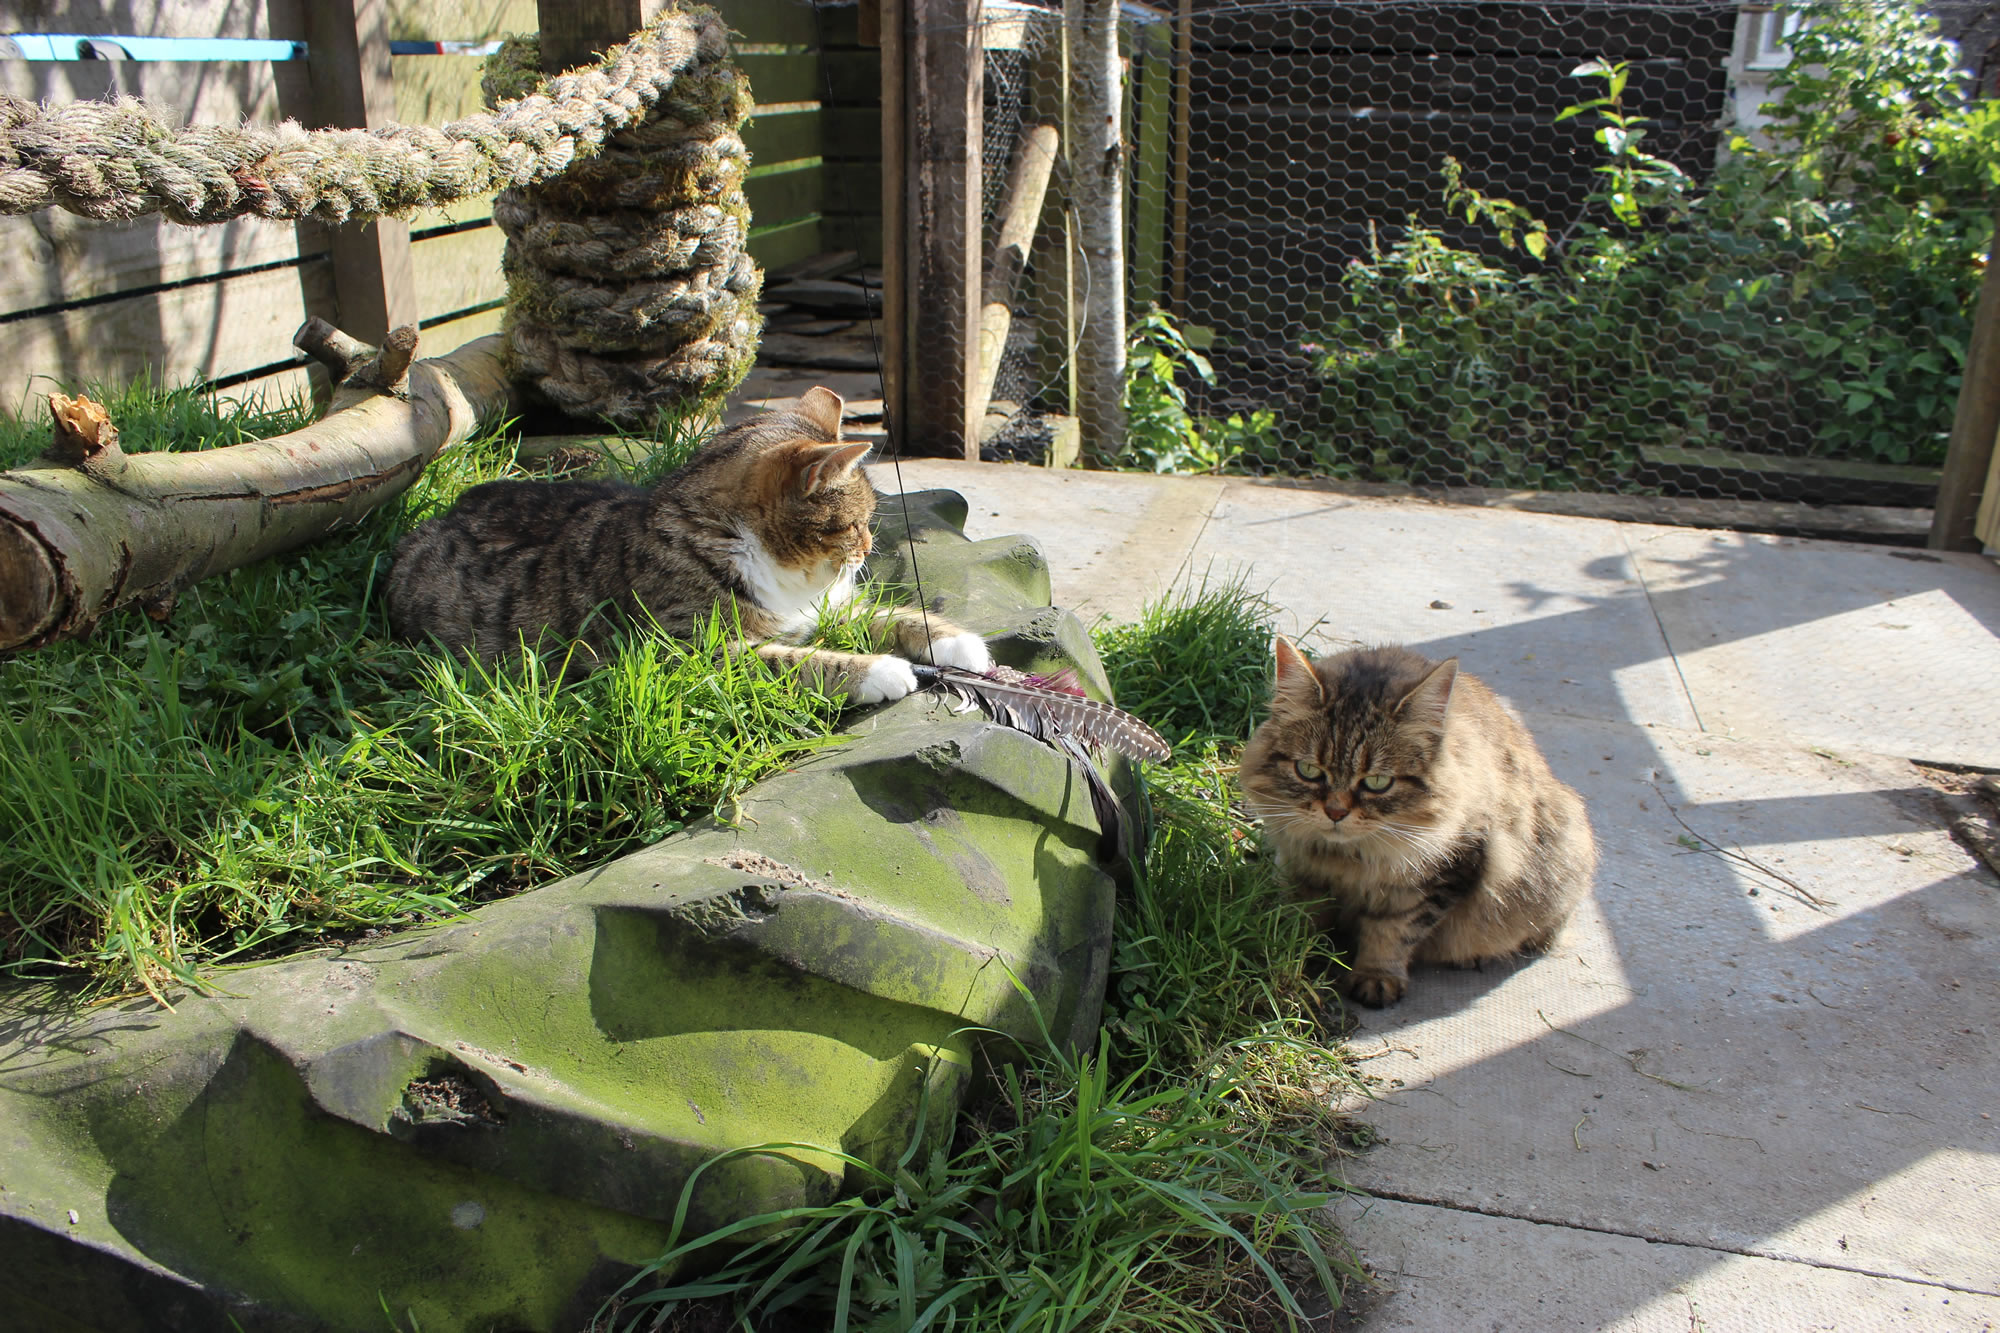 Cats - Cat Picture 33 - picture of Bobbie and Meg playing in a secure outdoor run